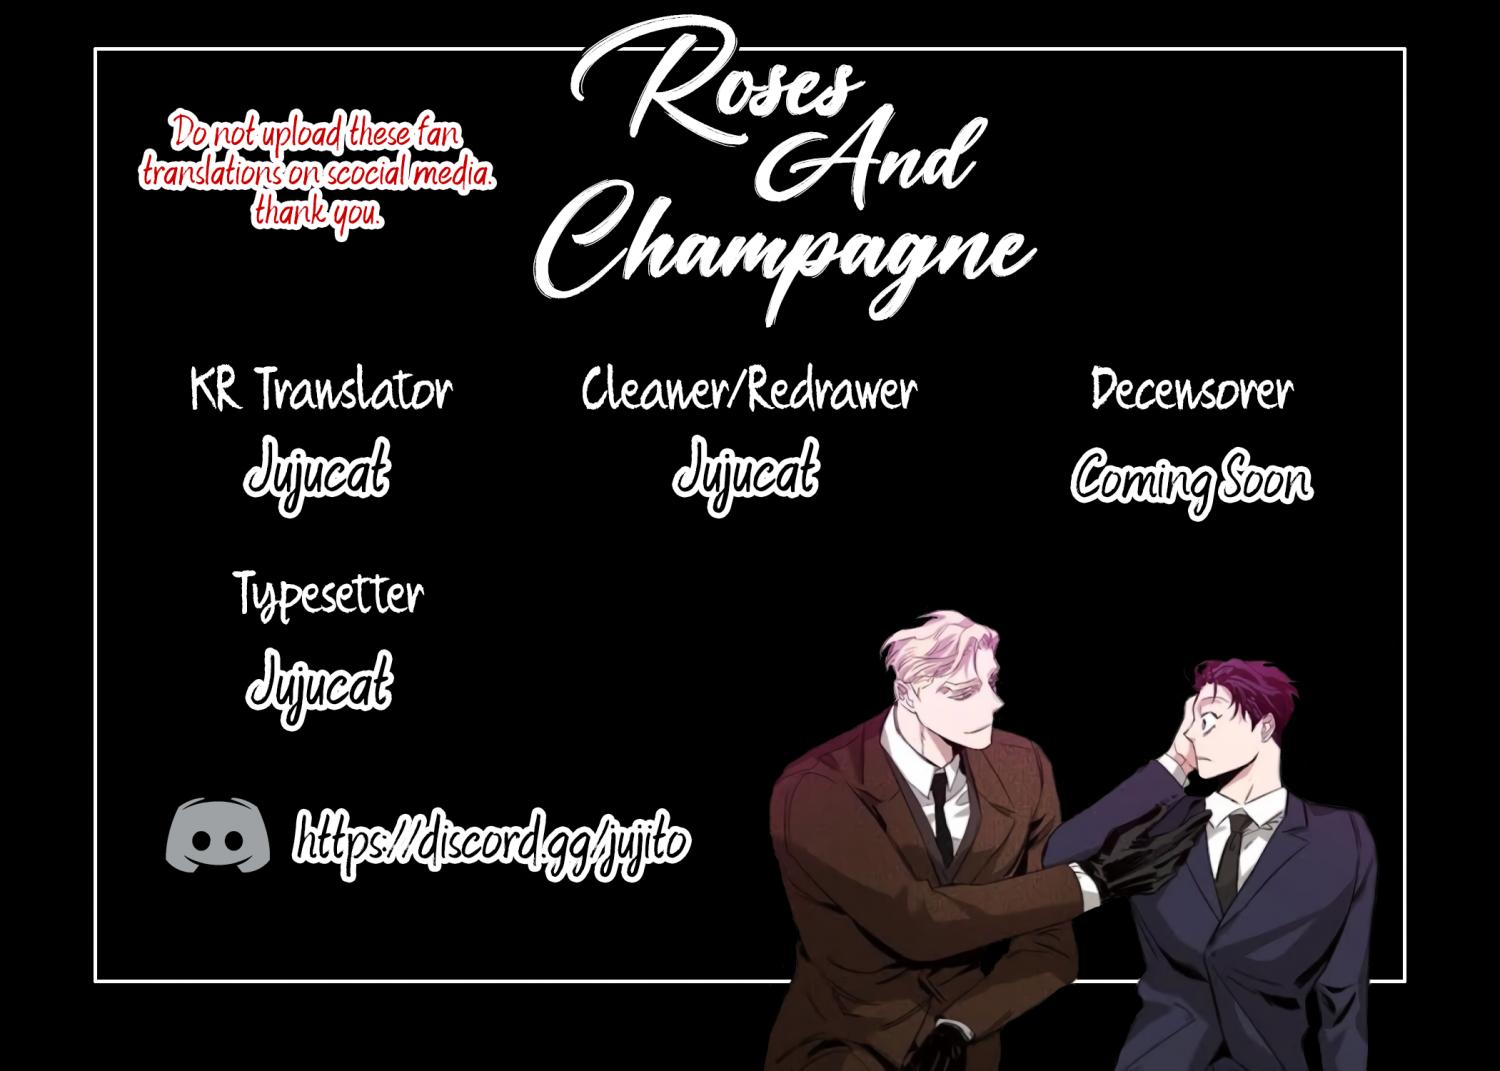 Roses And Champagne - Page 2